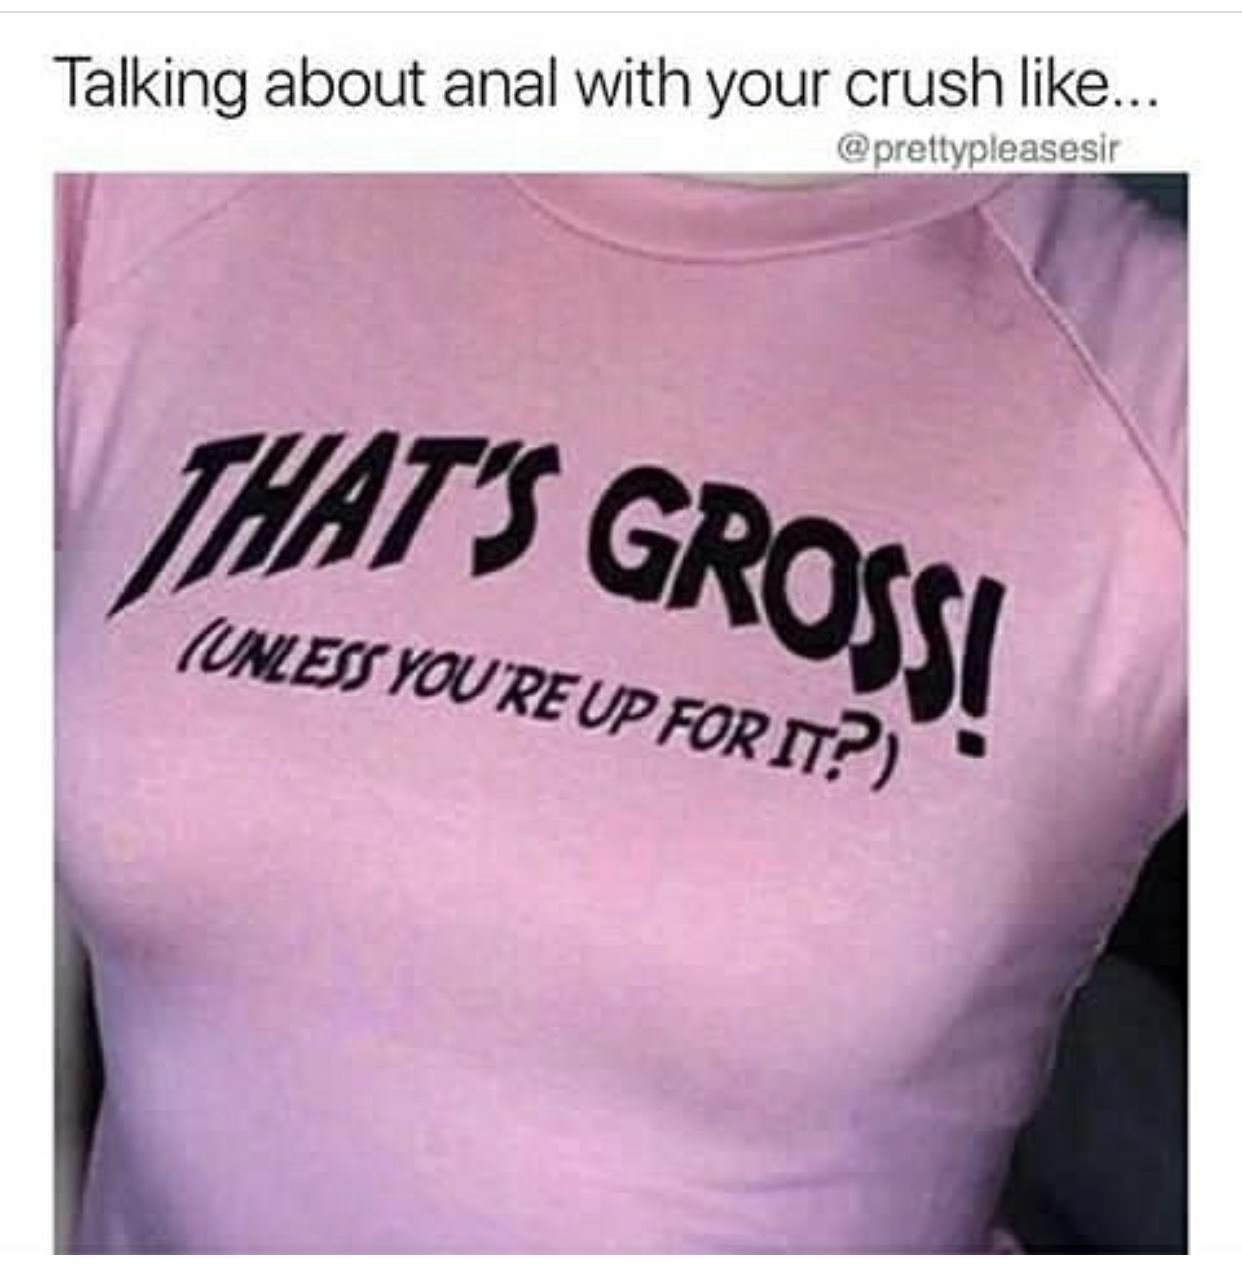 t shirt - Talking about anal with your crush ... That'S Grossi Unless You'Re Up For It?